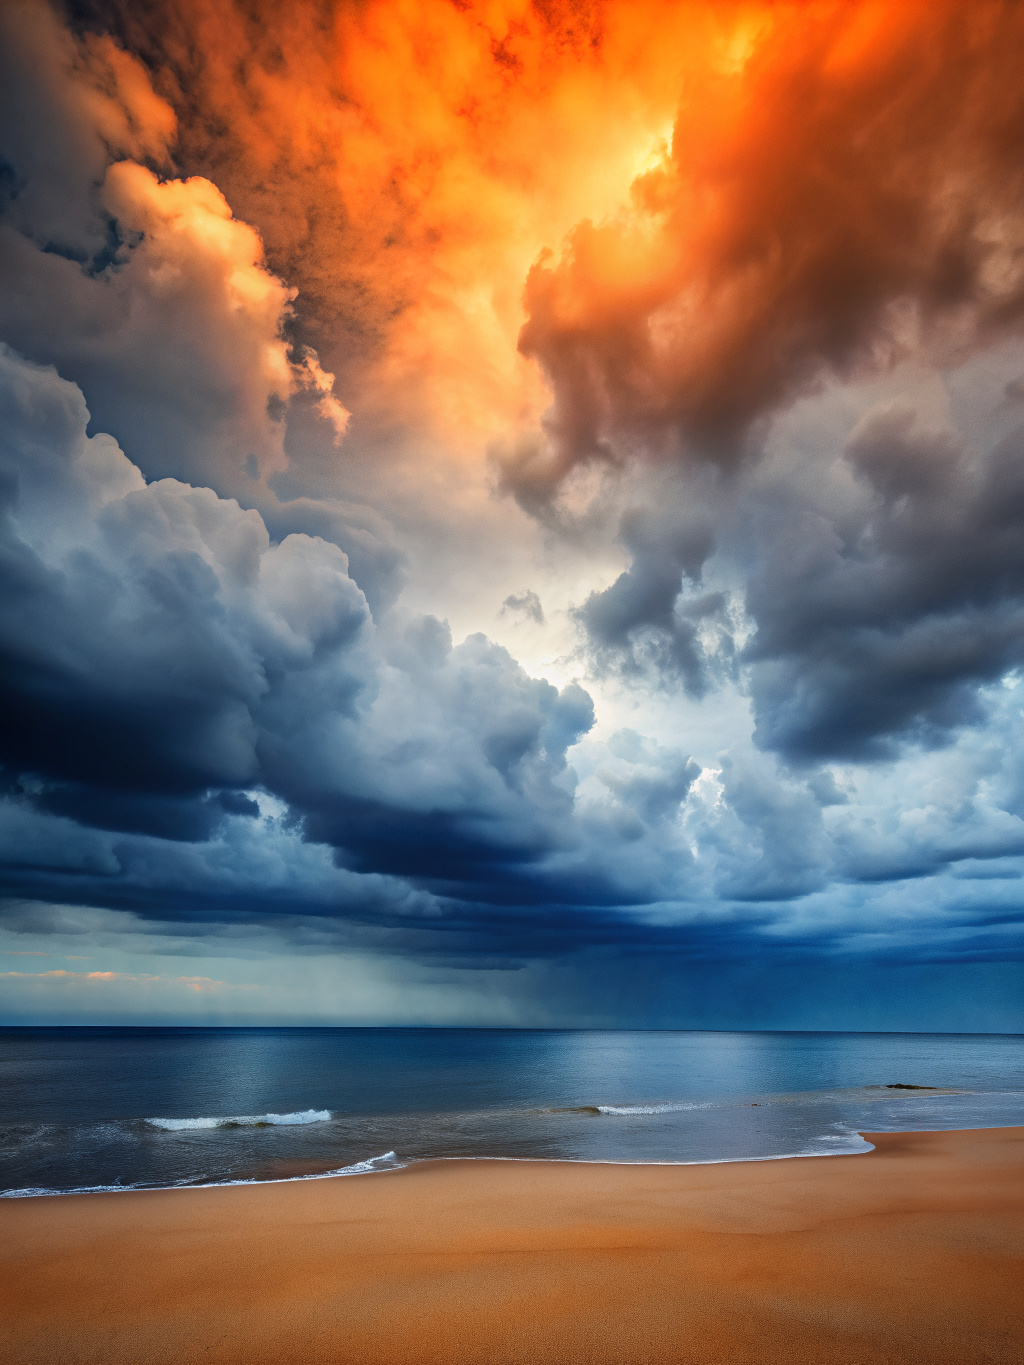 A cloudy beach view. The sky is completely covered with thunderclouds. Vibrant orange and blue colors. clouds.